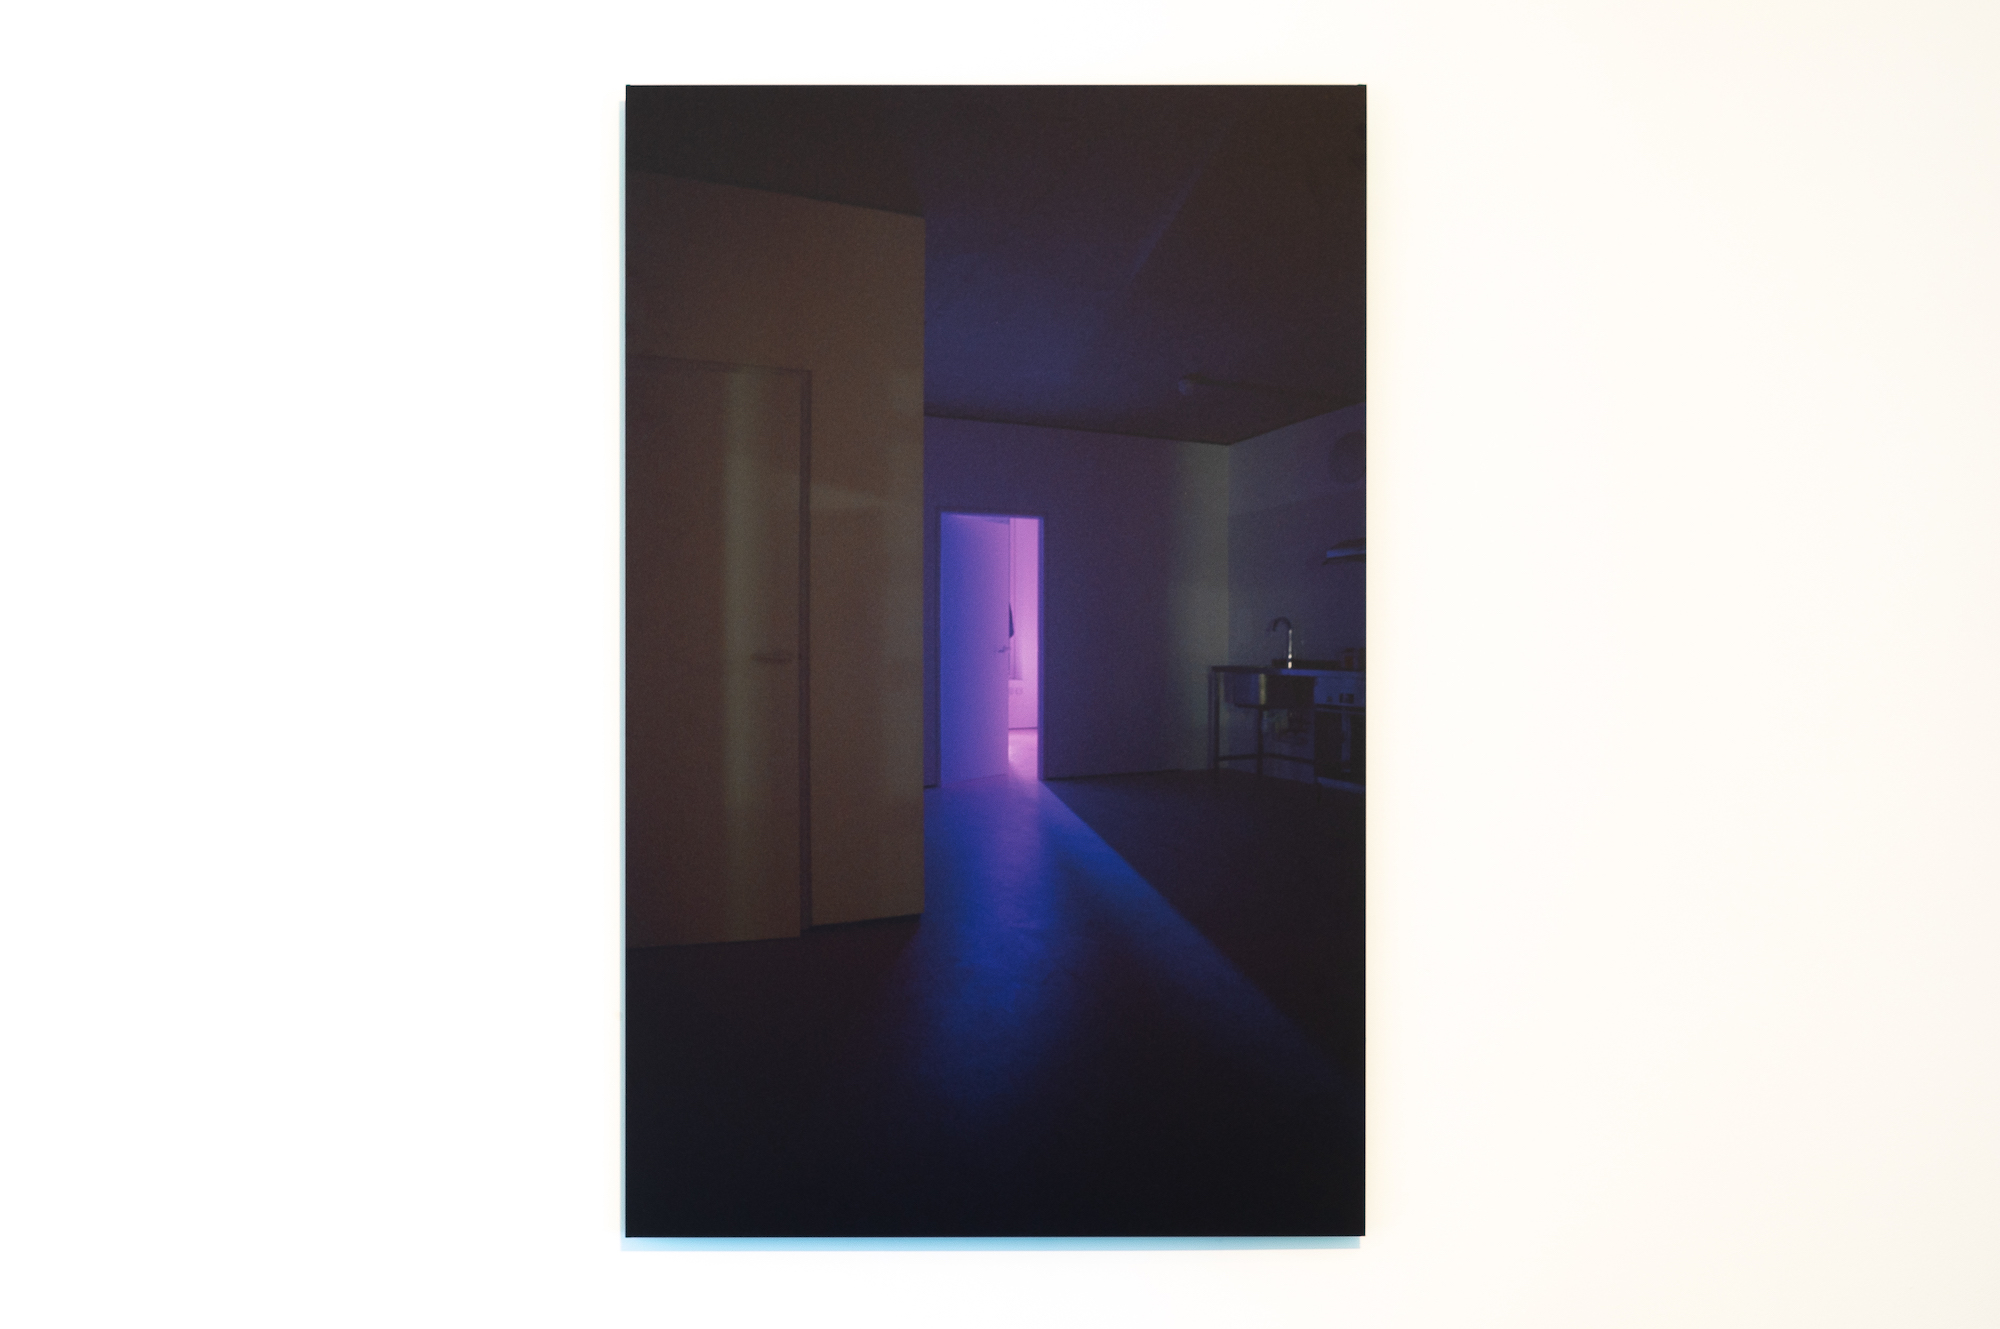 A vertical rectangular photo of a silhouette of a person in a doorway in the background with a purple light emanating.